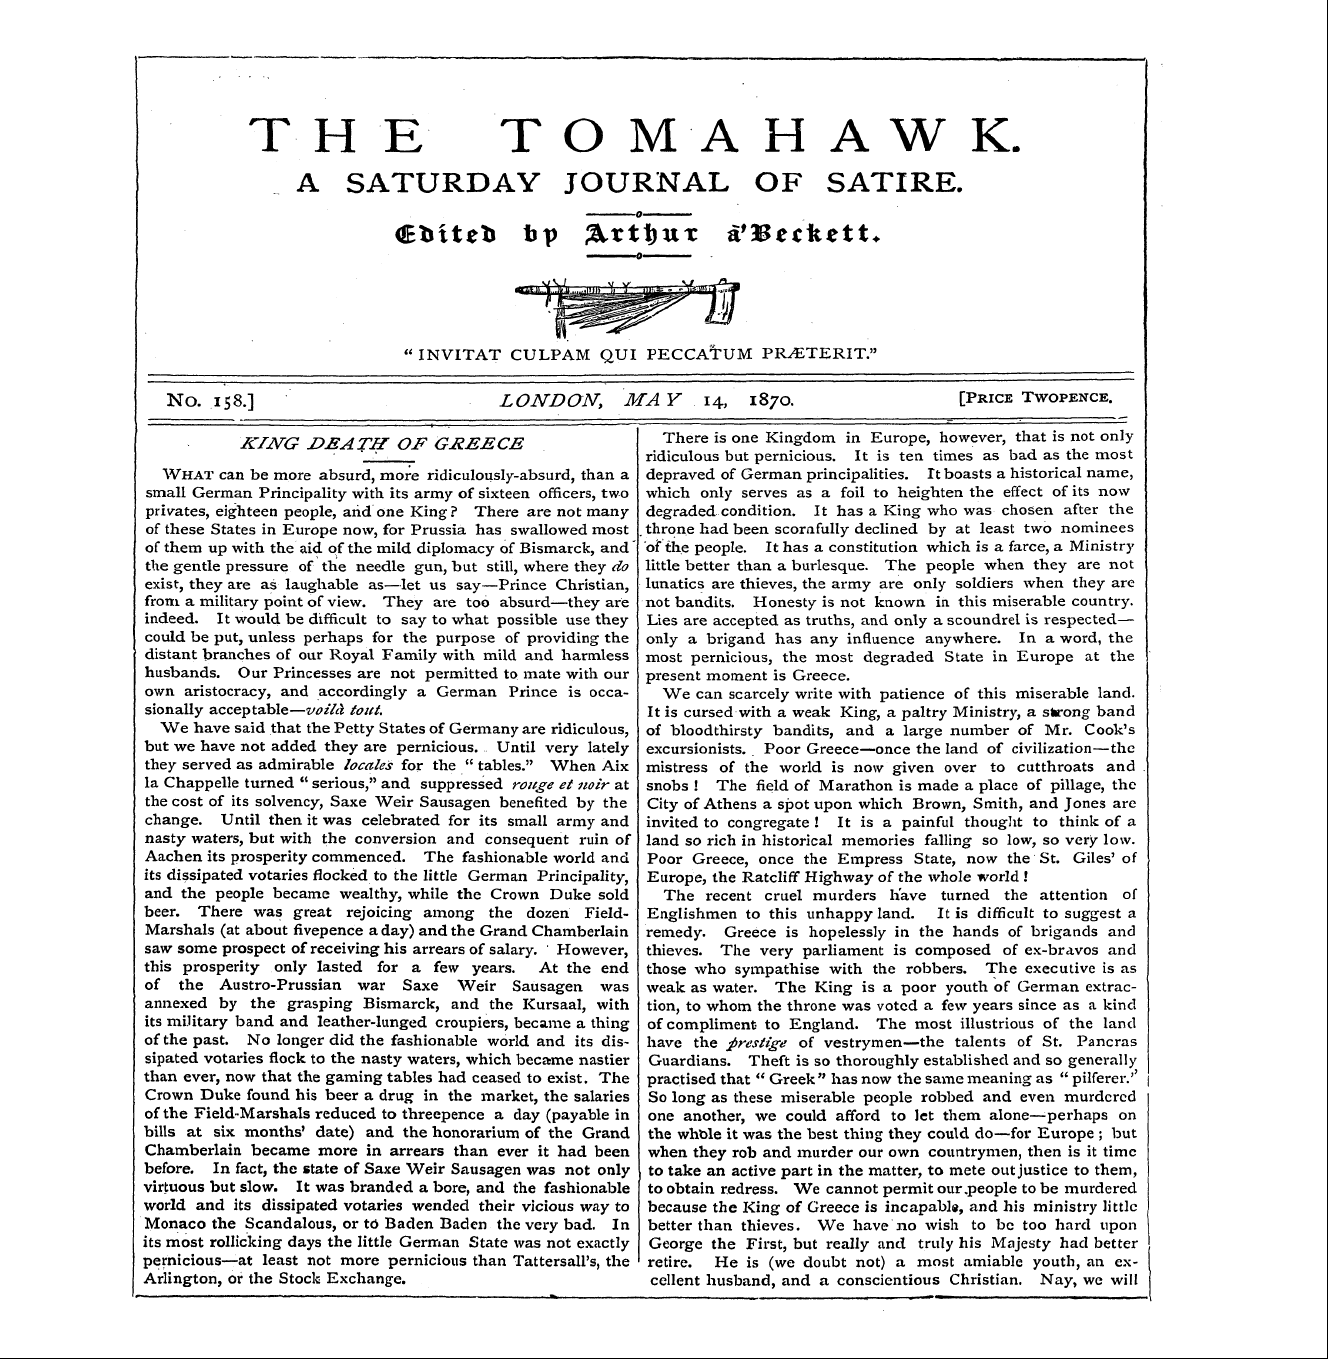 Tomahawk (1867-1870): jS F Y, 1st edition - What Can Be More Absurd, More Ridiculous...